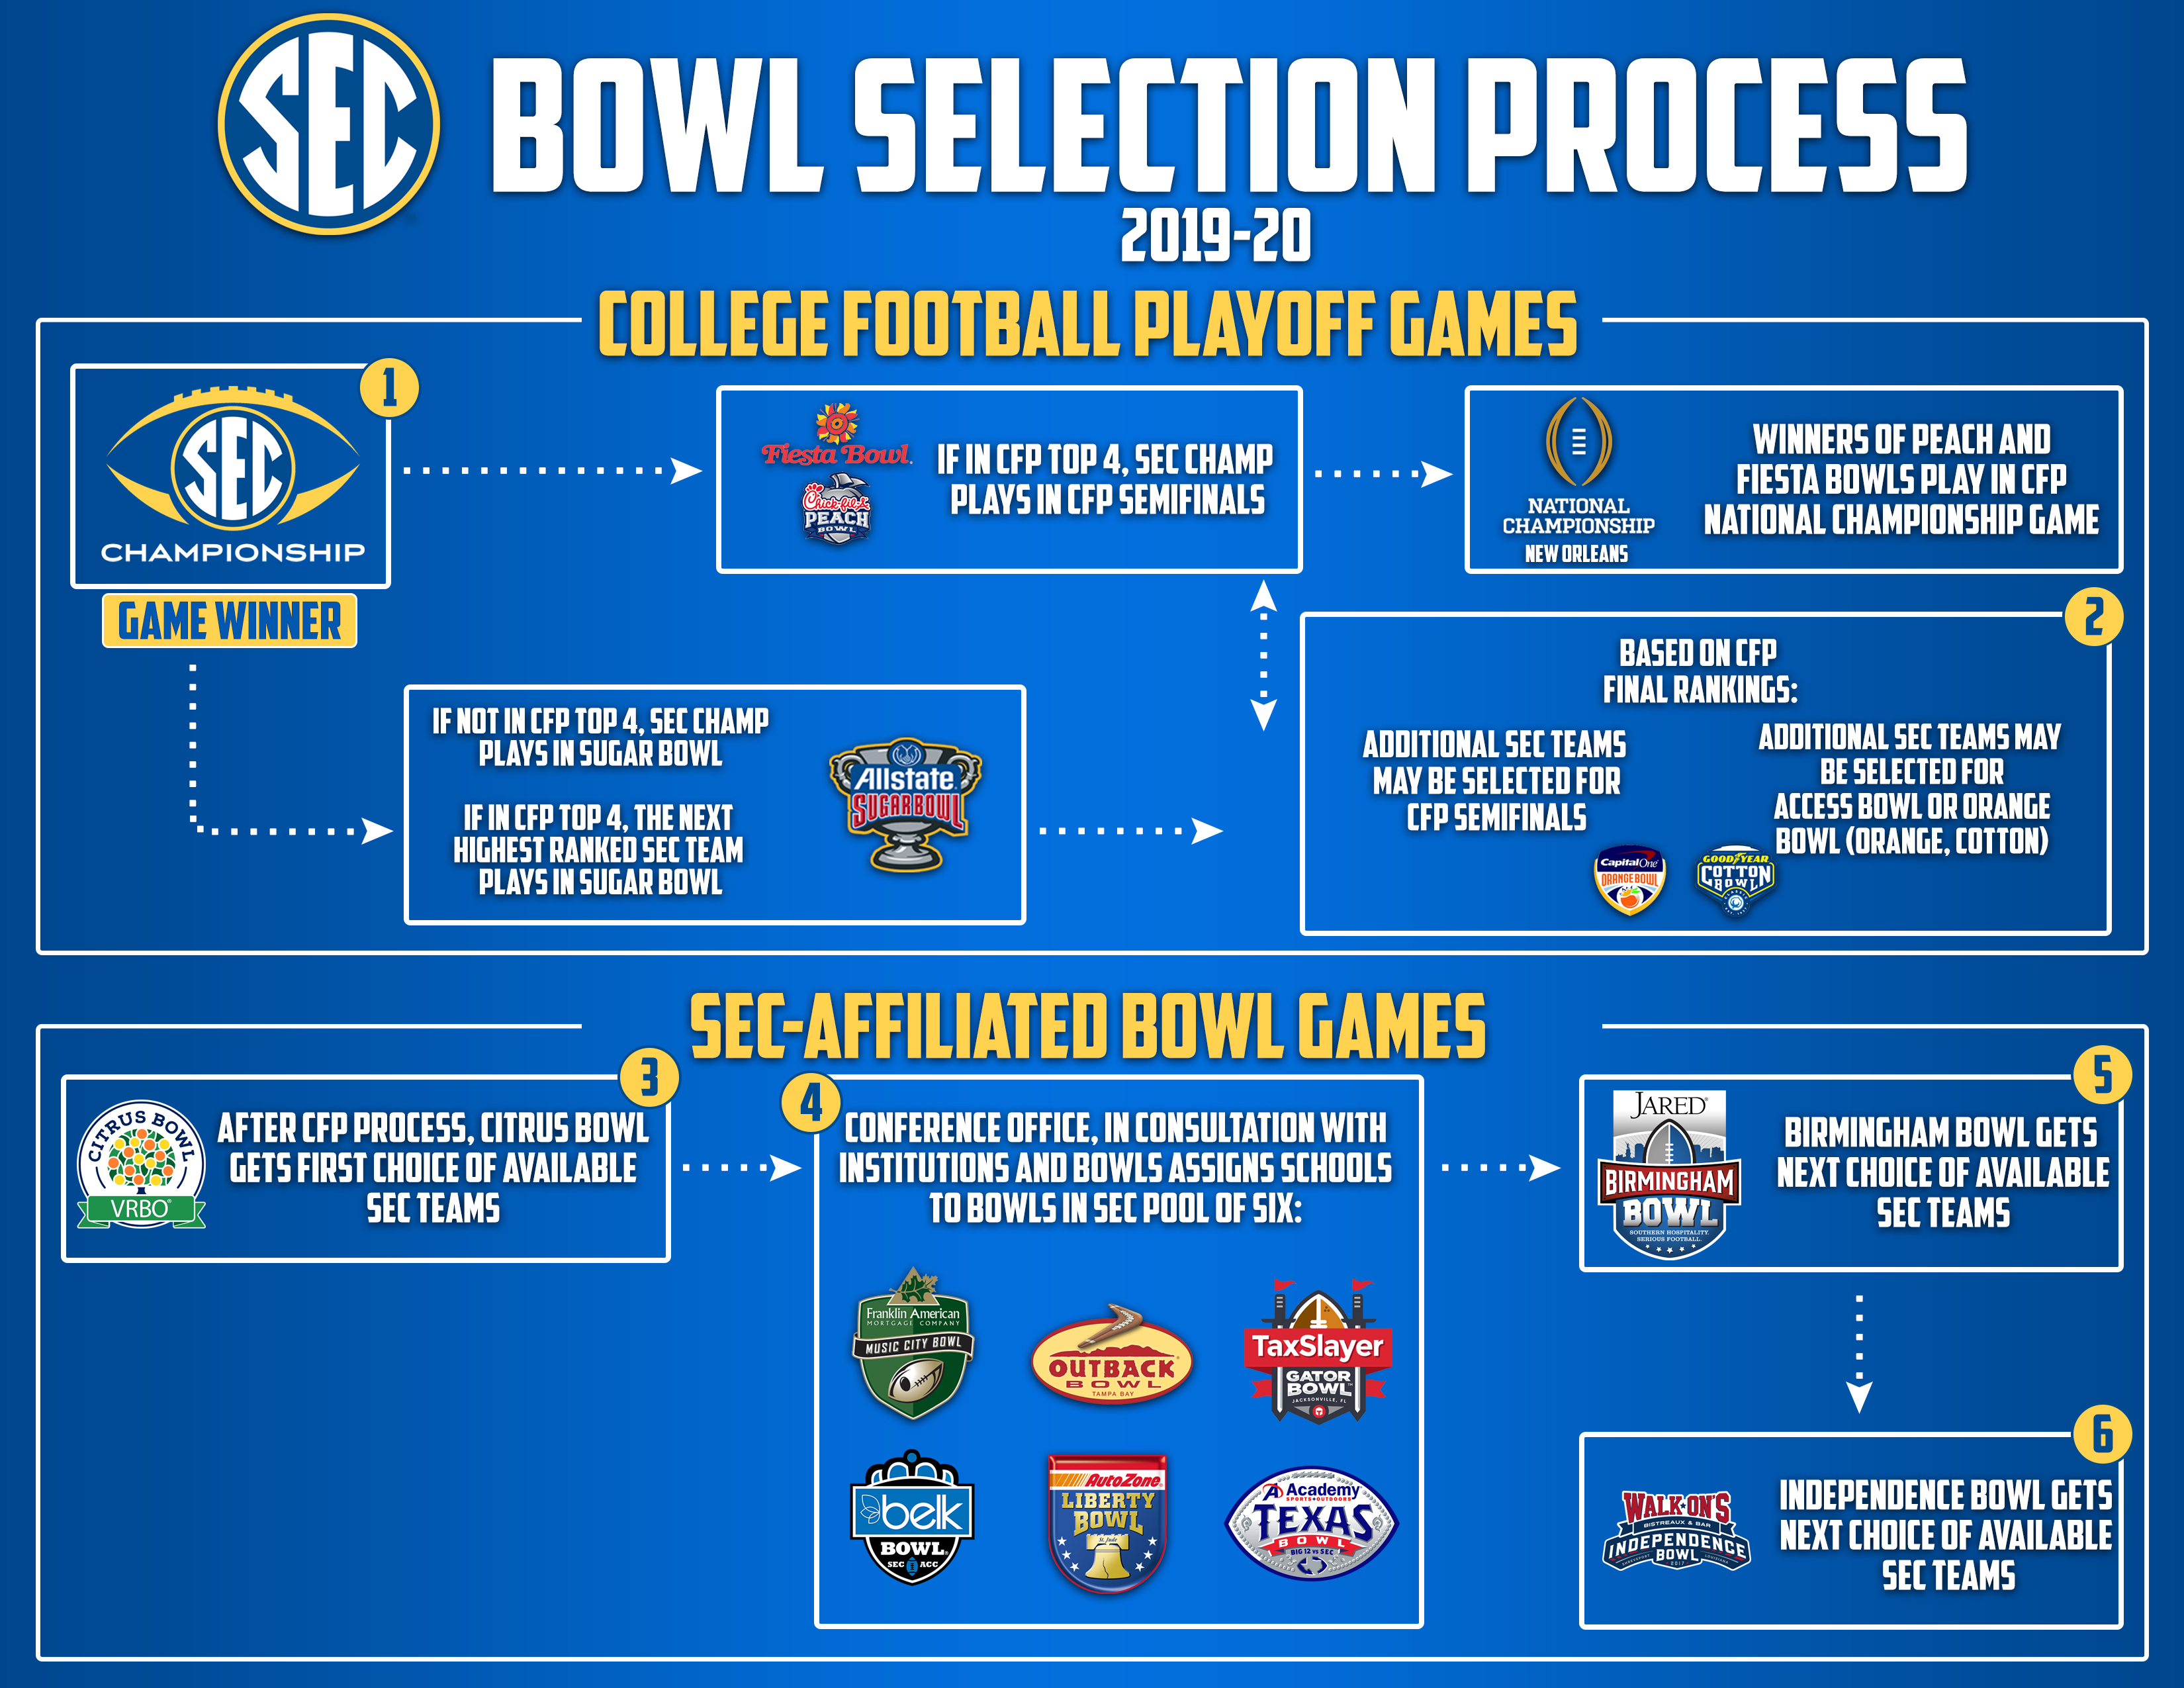 Big 12/SEC bowl game might trigger a plus-one playoff